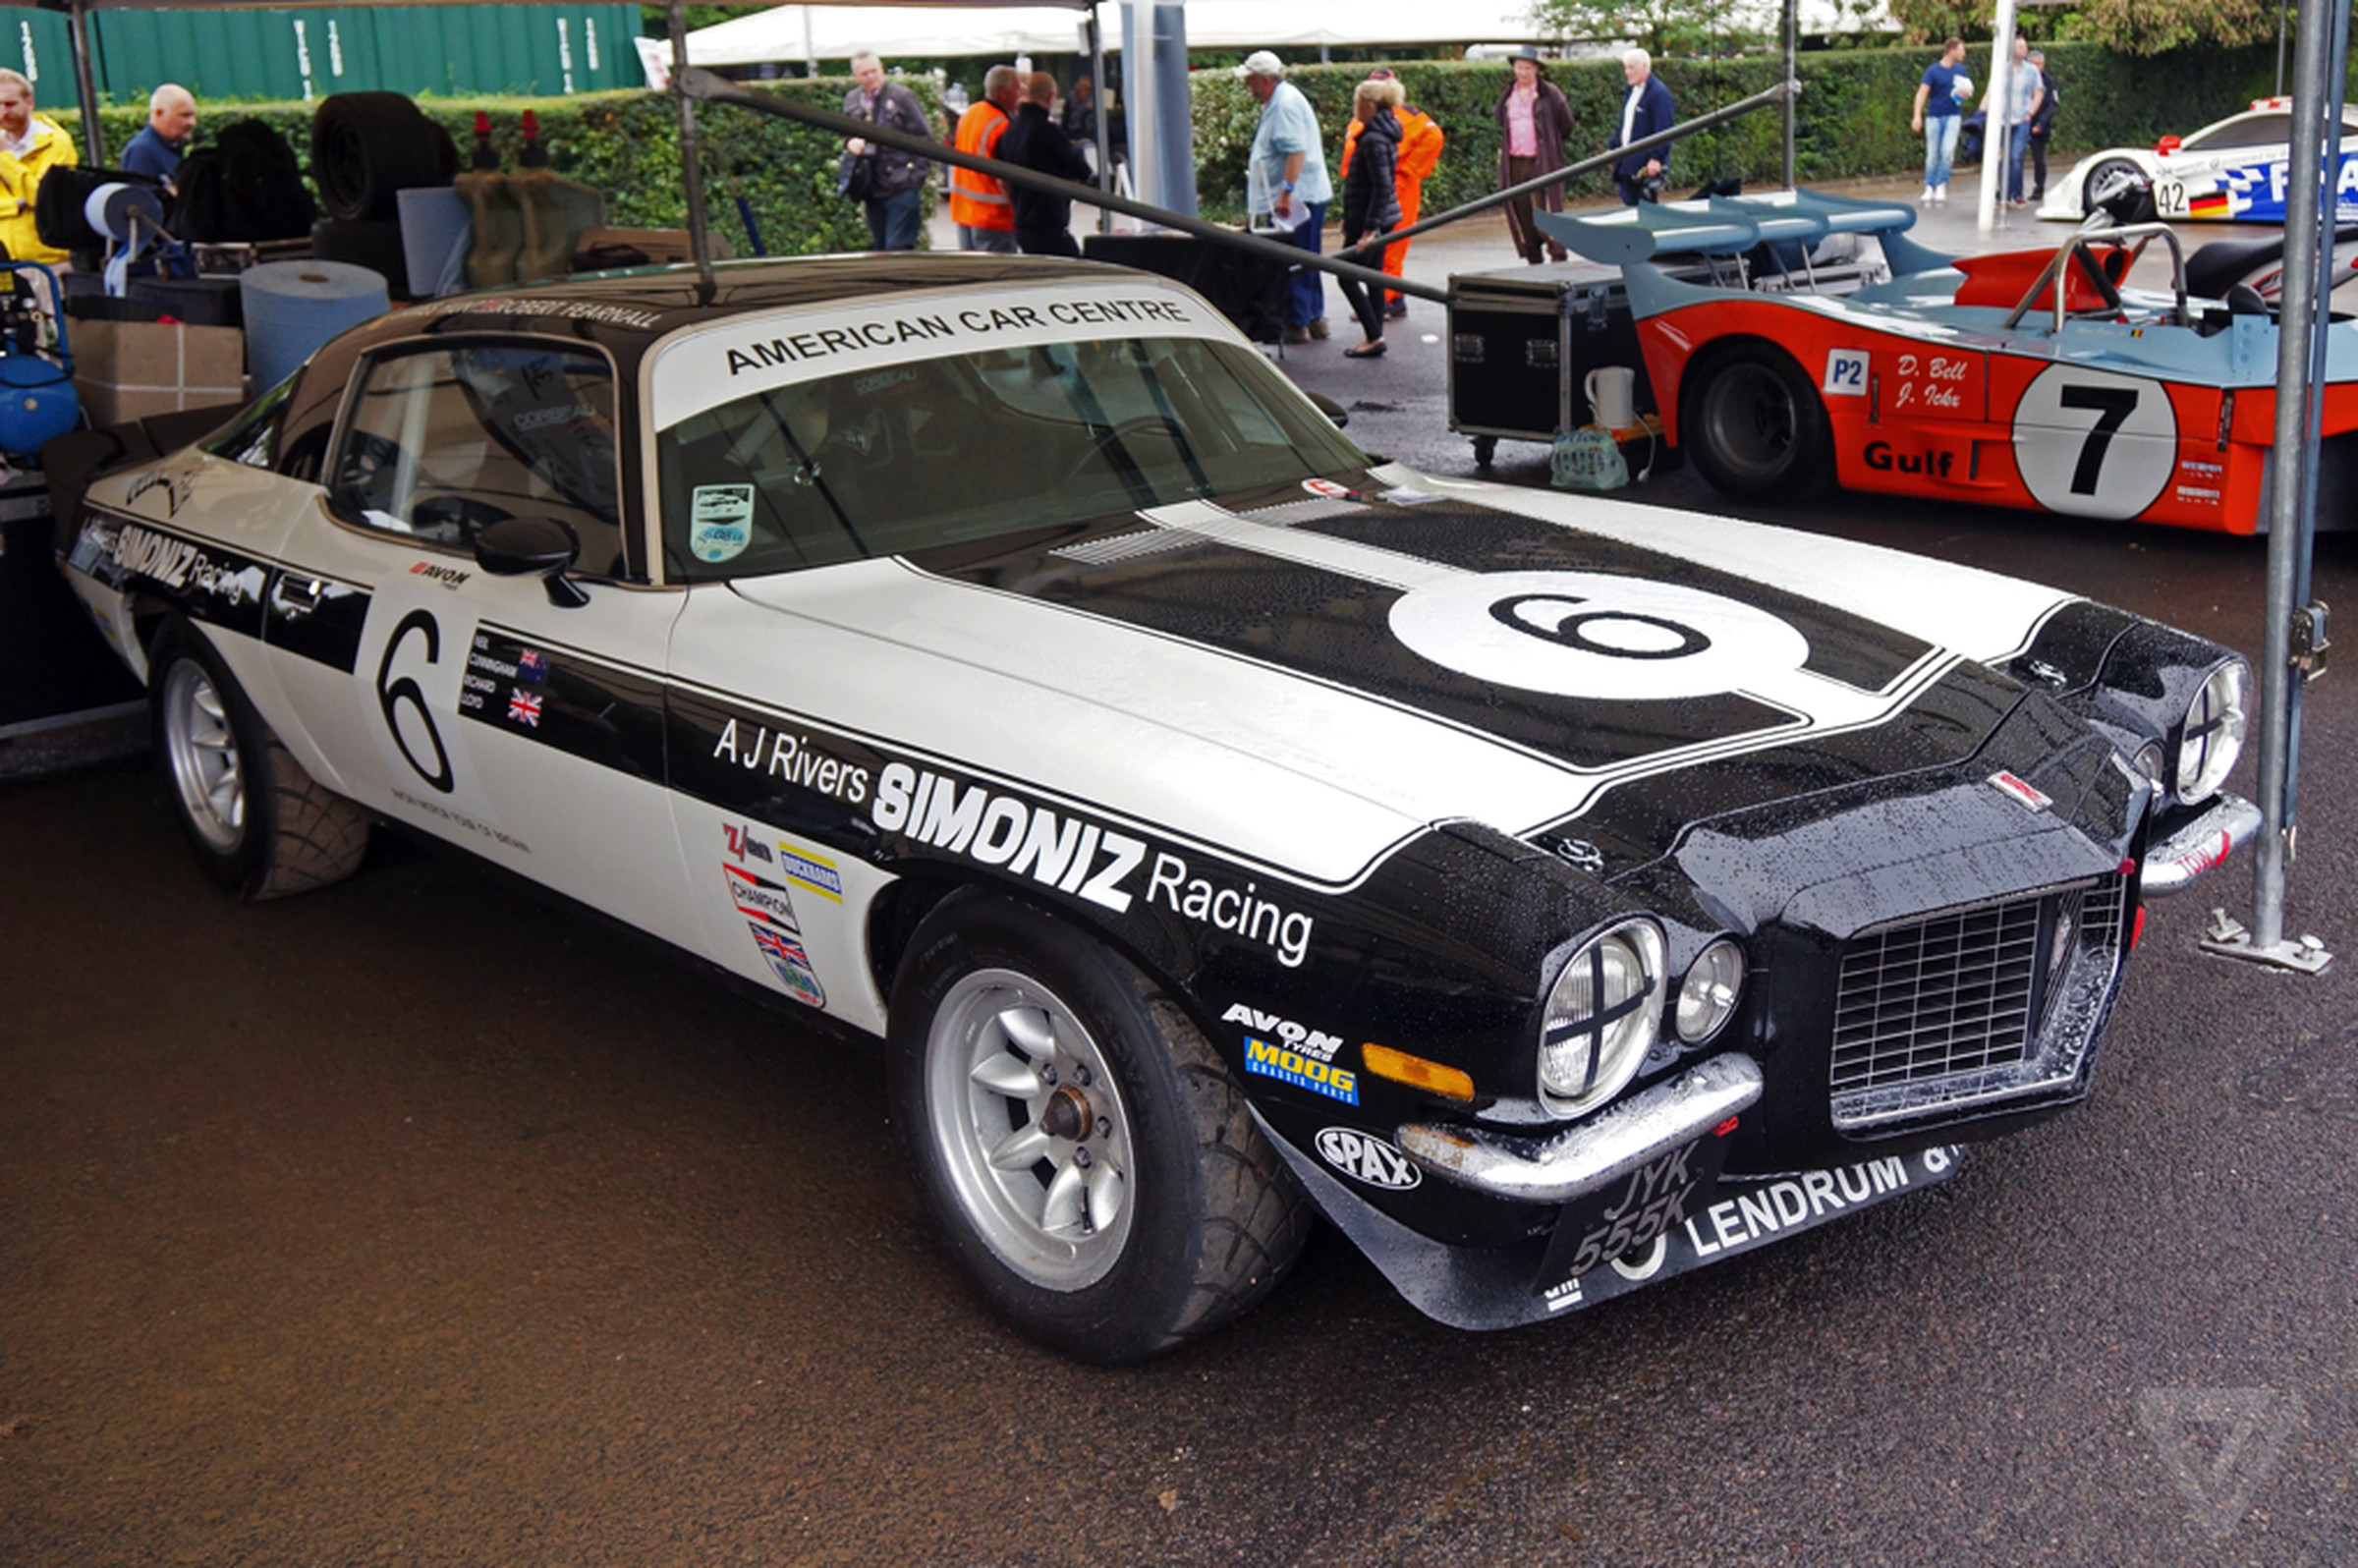 Goodwood Festival of Speed 2016 classic cars, part 2